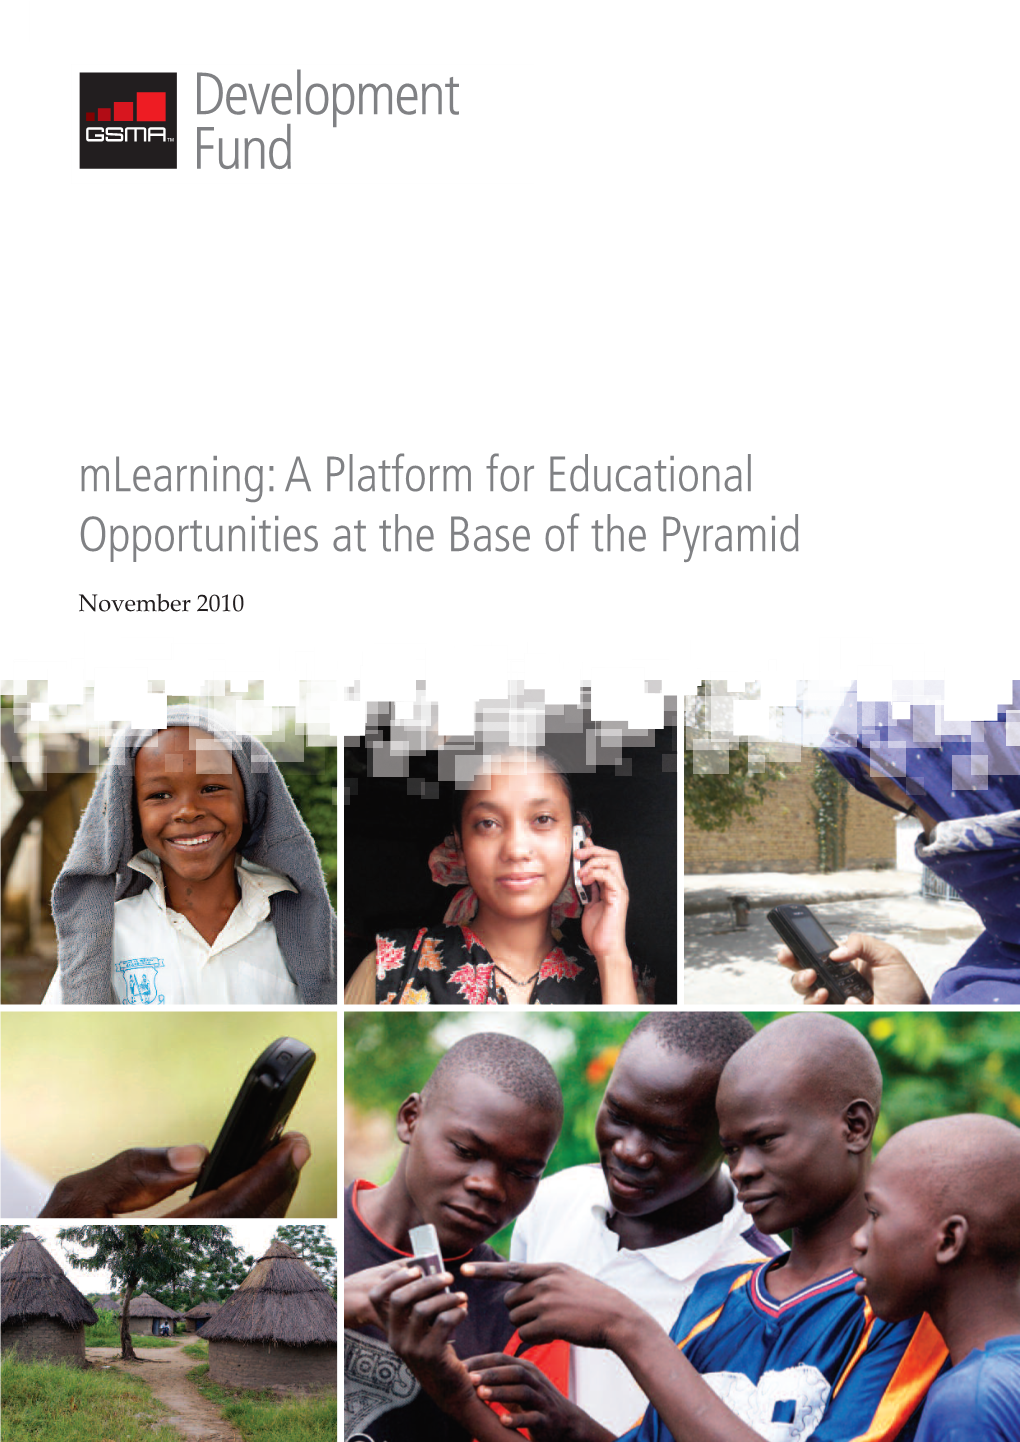 Mlearning: a Platform for Educational Opportunities at the Base of the Pyramid